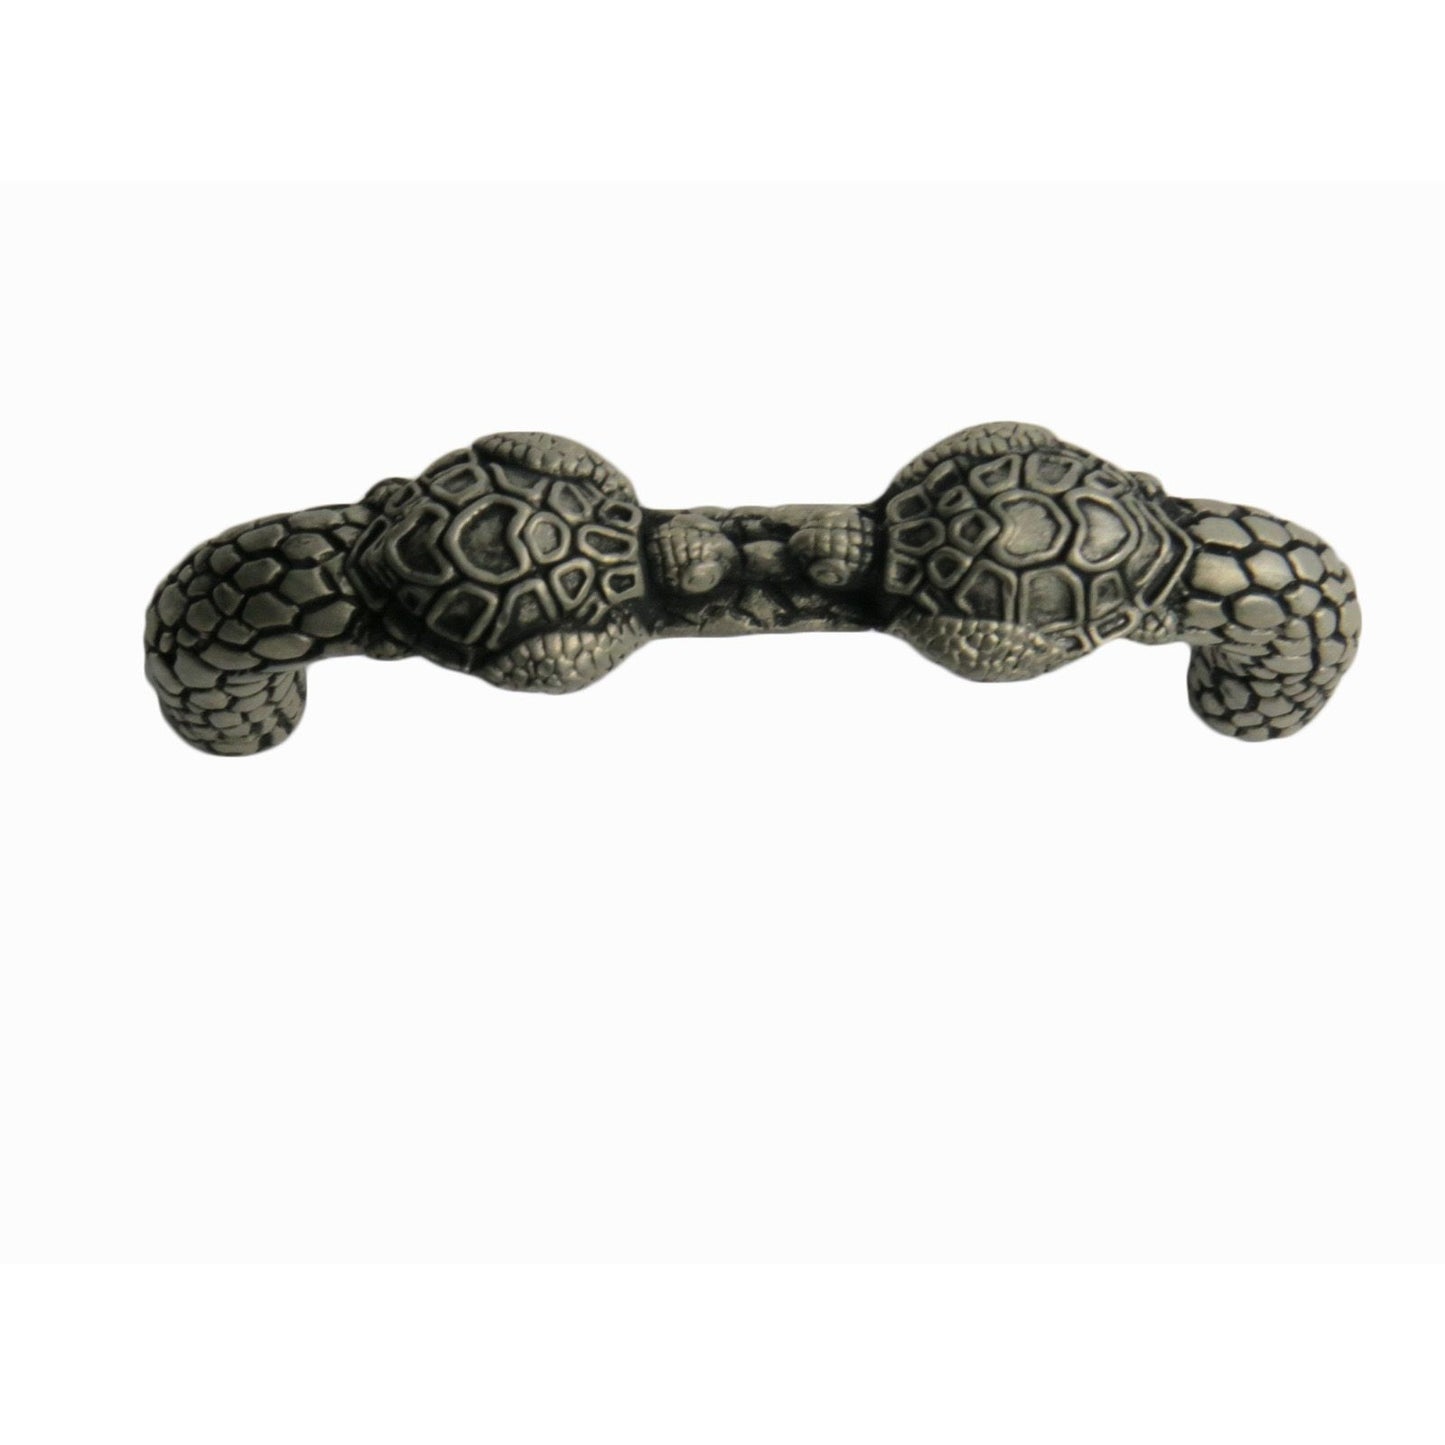 Cabinet Pull Vicenza Designs K1059 Pollino Turtle Pull 3-Inch Polished Silver